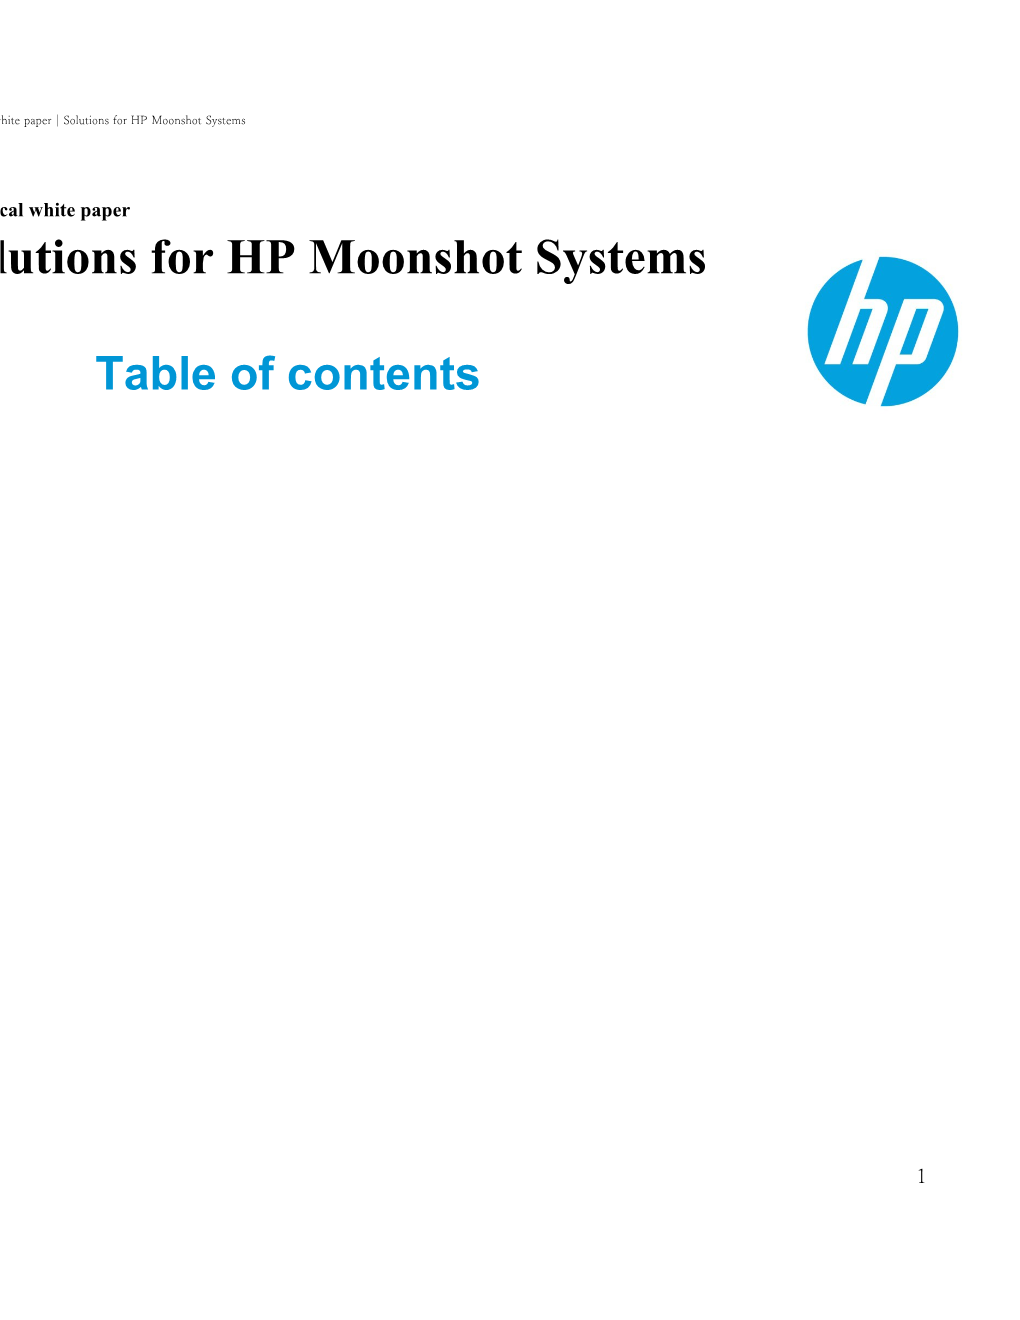 Technical White Paper Solutions for HP Moonshot Systems